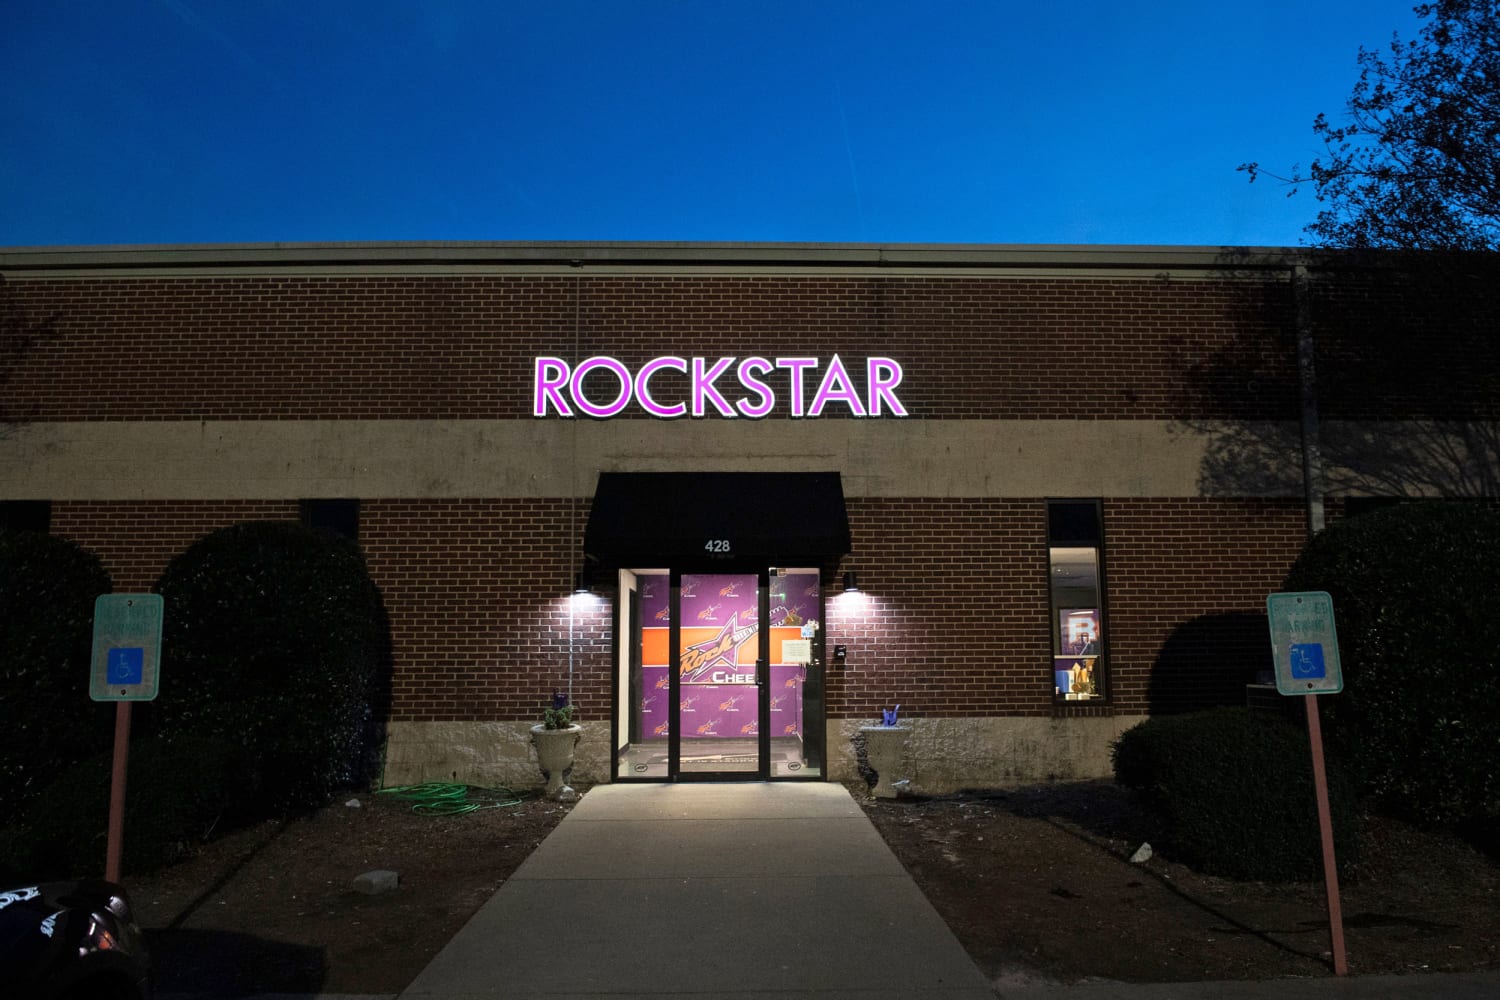 Rockstar Cheer, cheerleading gym based in South Carolina, embroiled in sexual abuse scandal photo